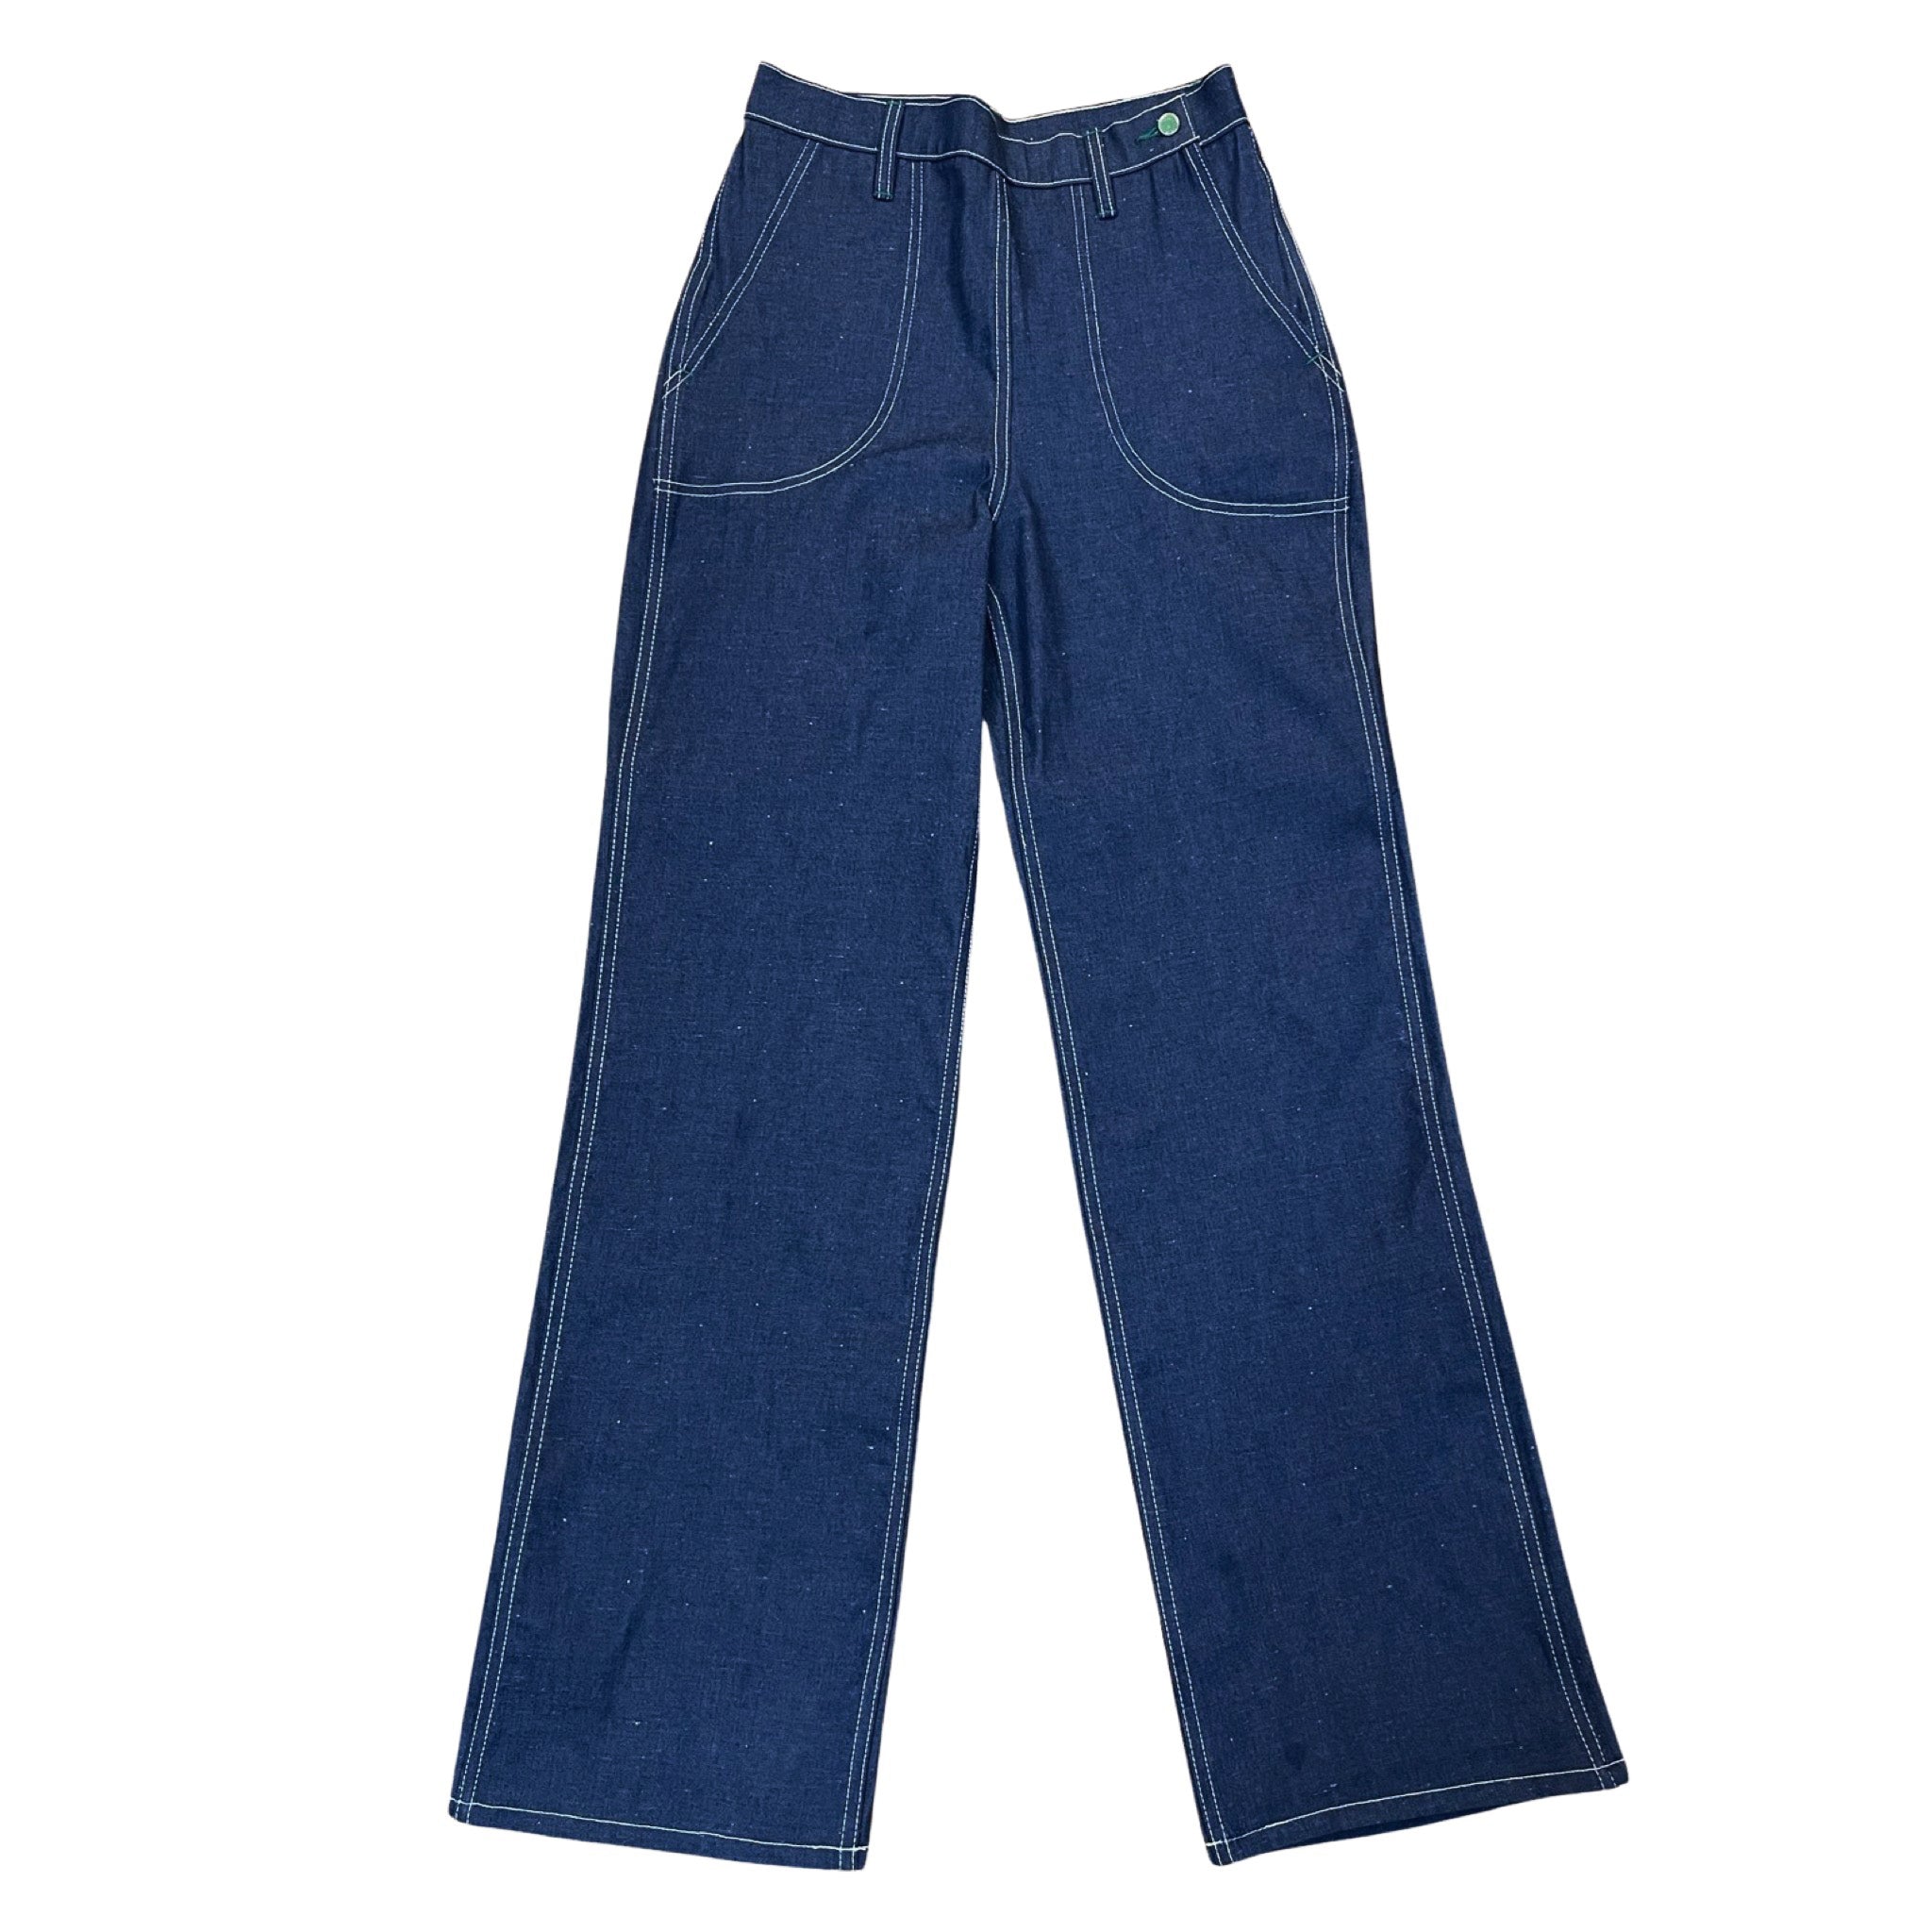 Durable Men's Clothing | Denim Jeans, Chinos & Tees | Left Field NYC